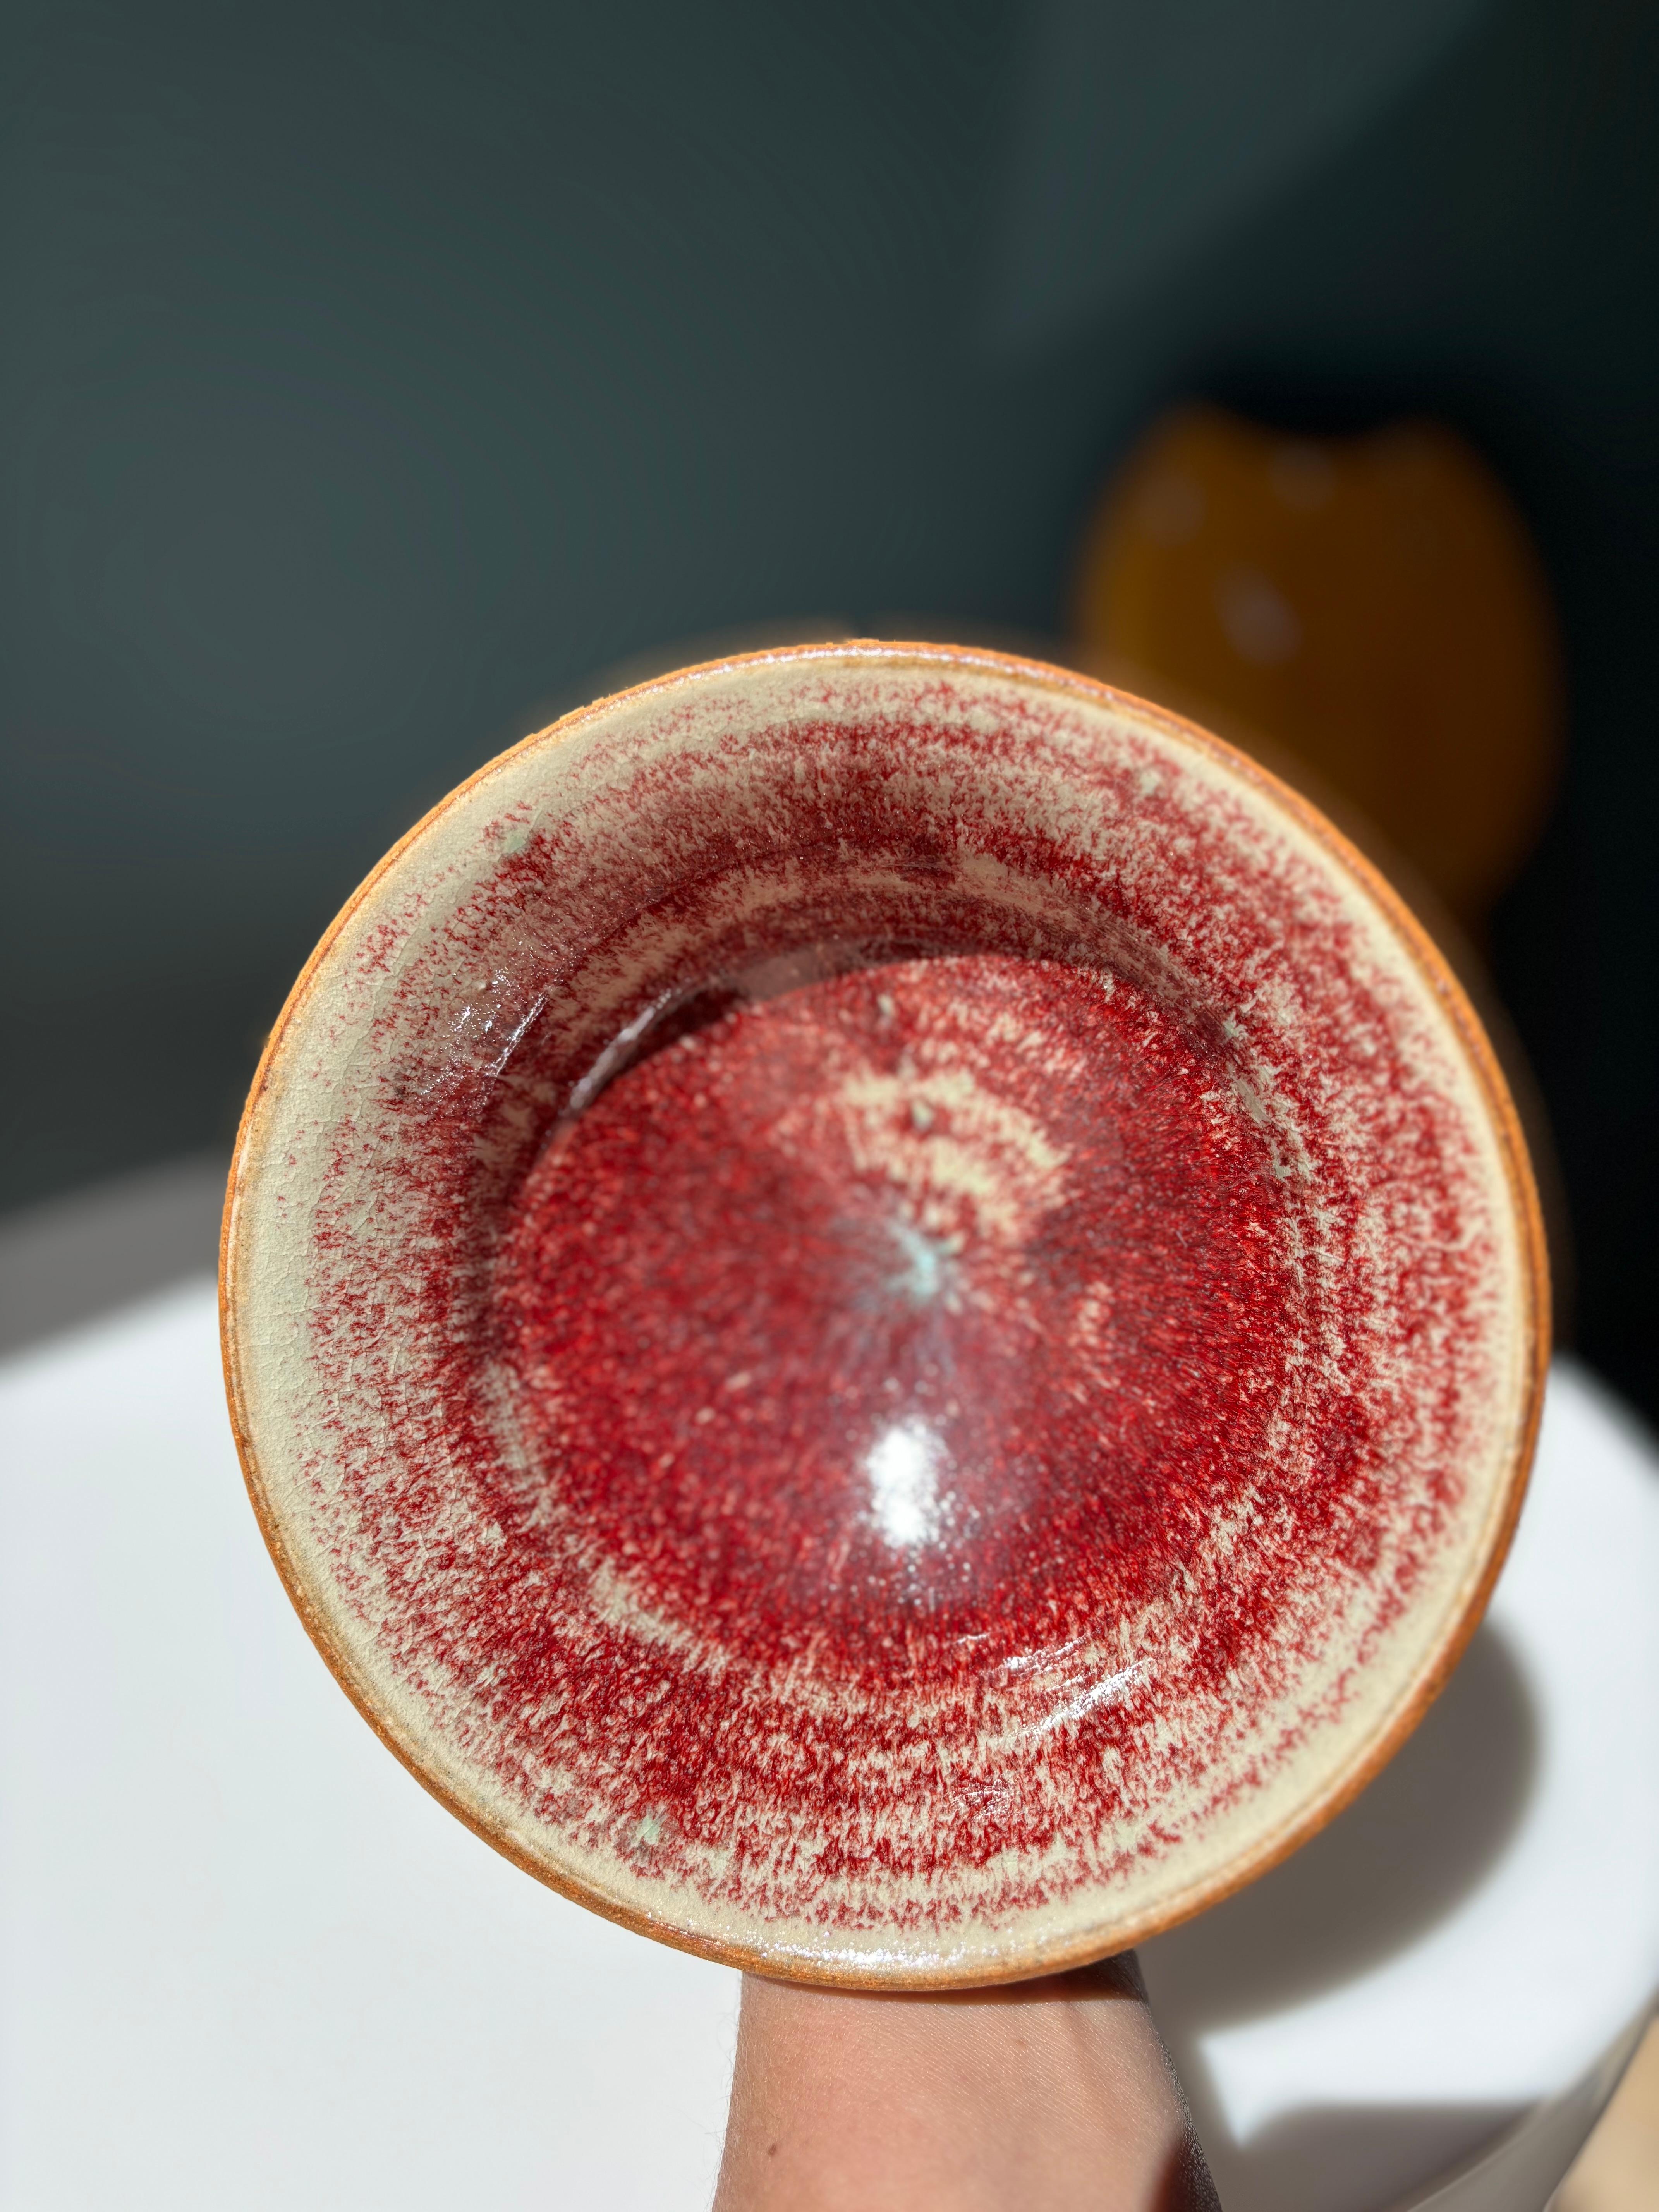 Vintage studio ceramic decorative bowl by Swedish designer Janne Fagerfäldt in the 1970s. The handthrown bowl has an unglazed exterior and beautiful shiny ox blood glaze with a turquoise tint on the inside. No signs of use or wear. Signed under